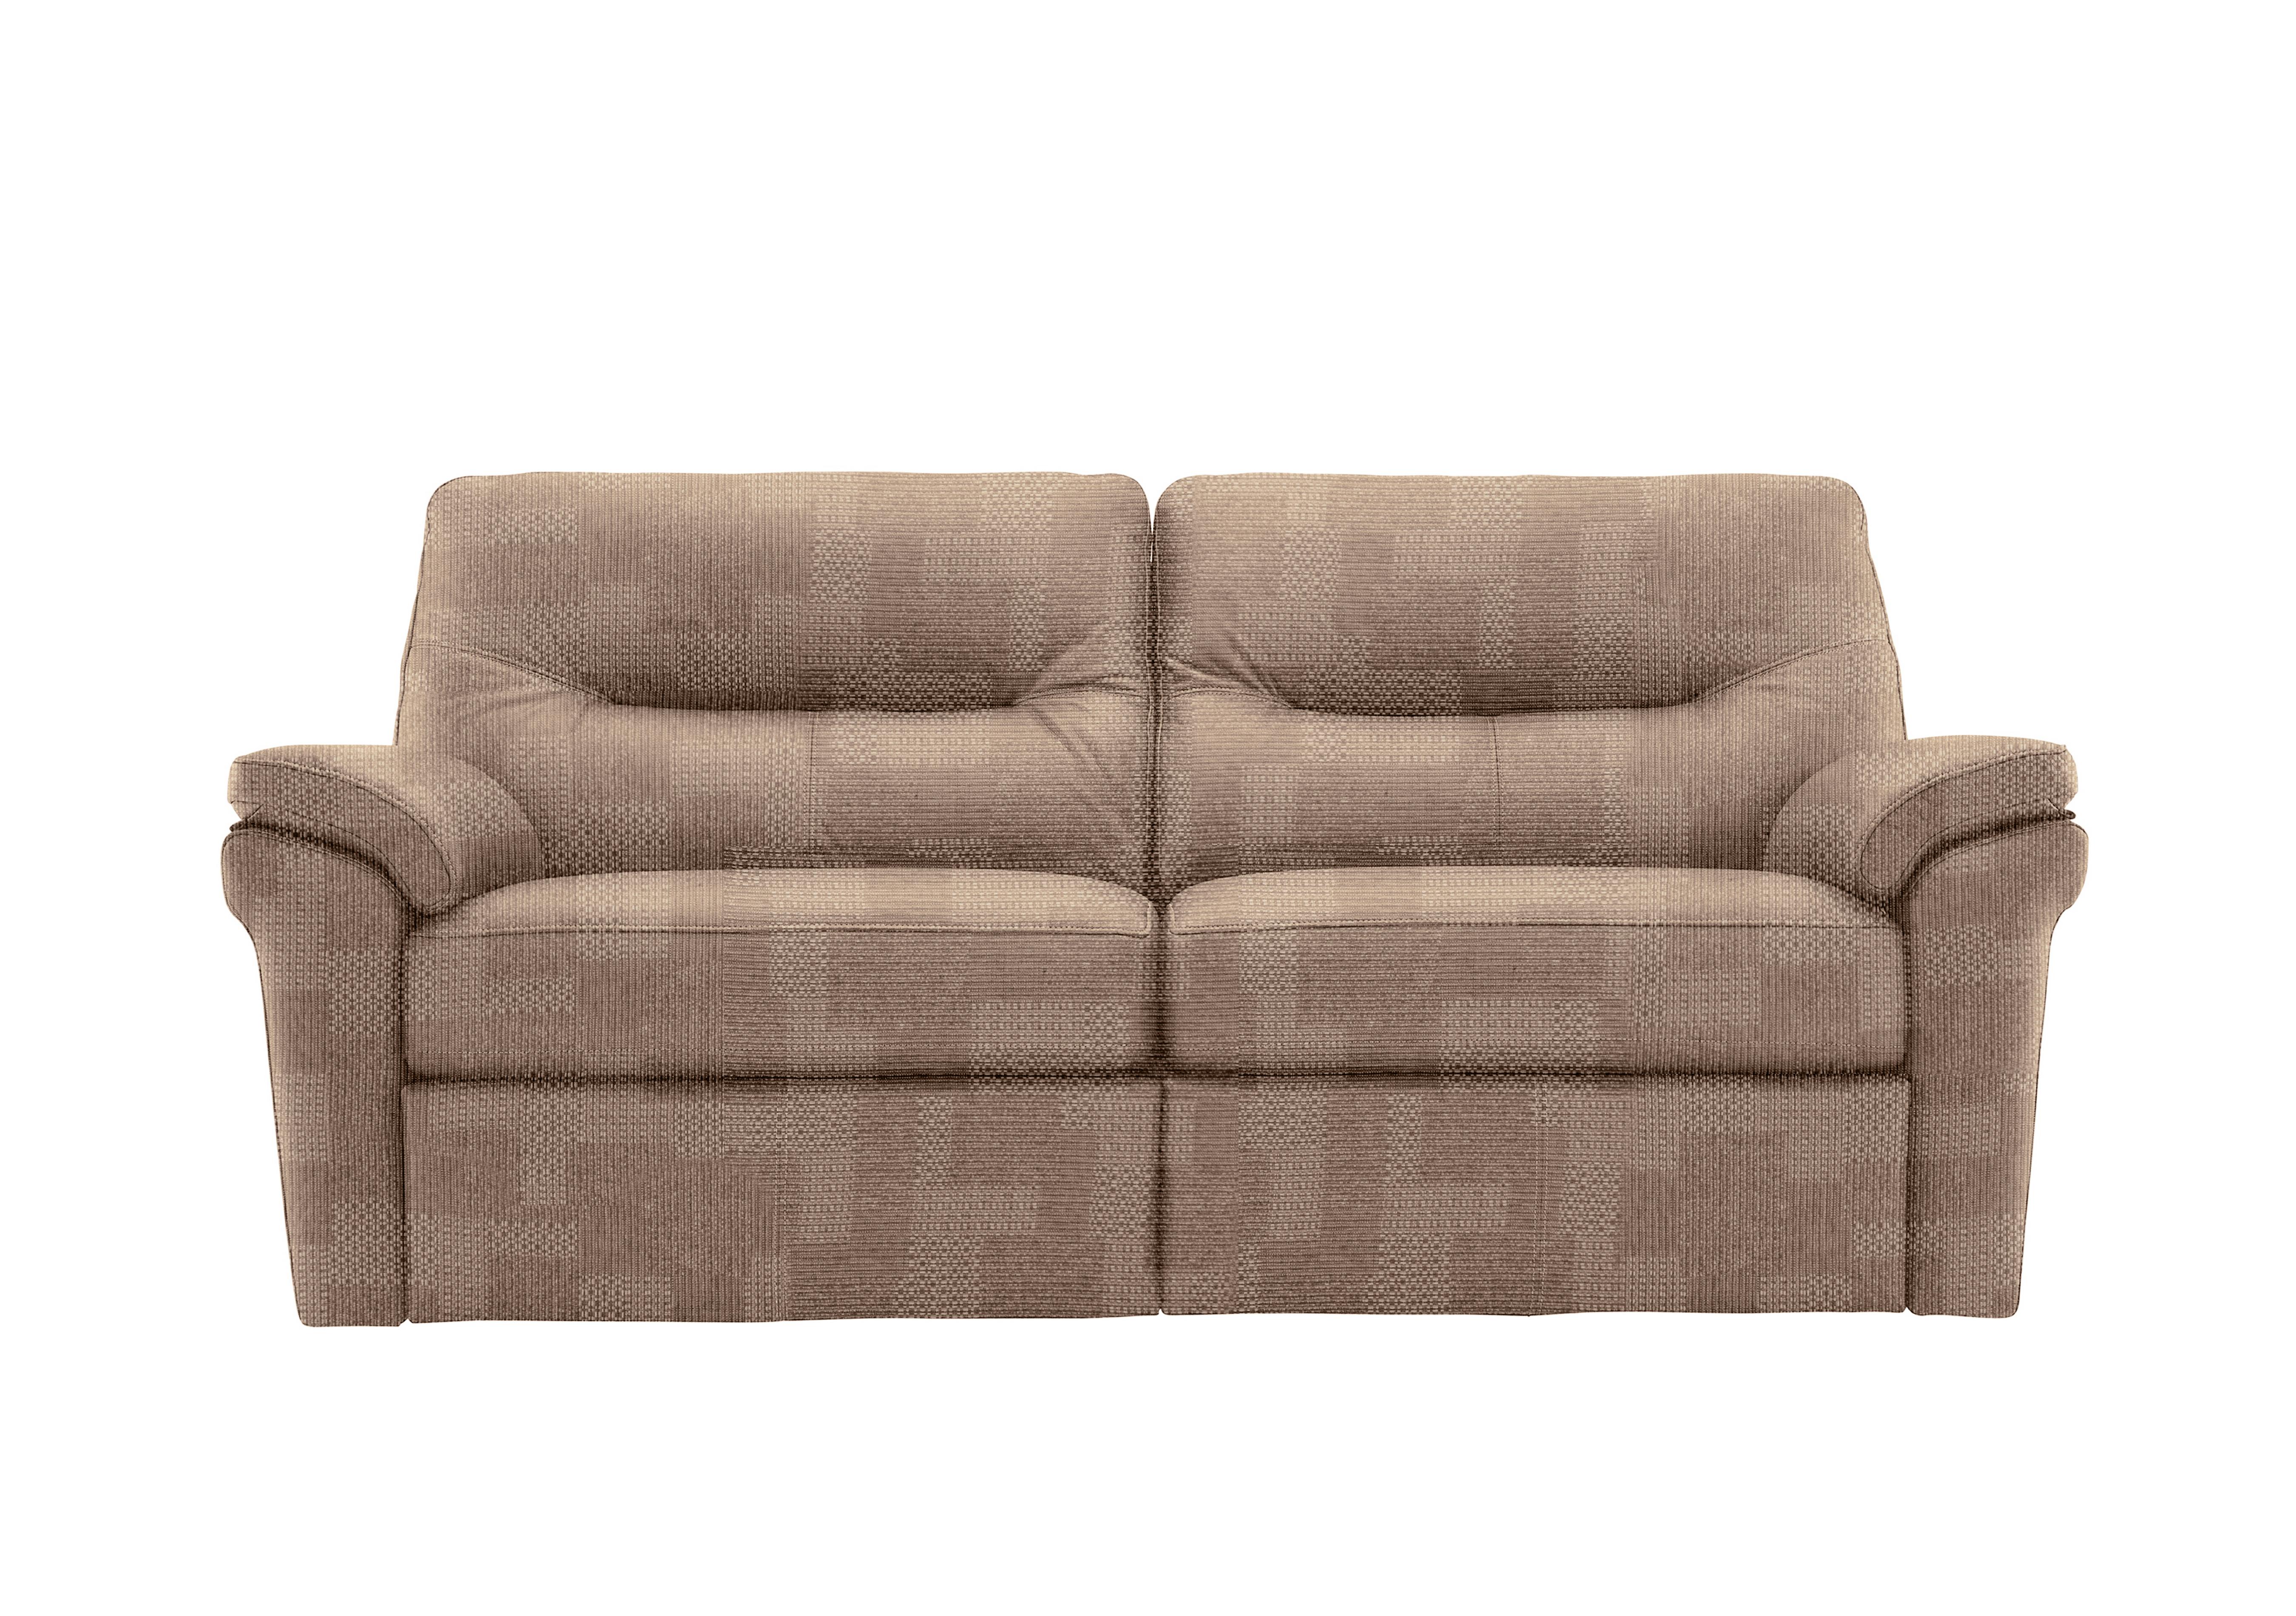 Seattle 3 Seater Fabric Power Recliner Sofa with Power Lumbar in A800 Faro Sand on Furniture Village